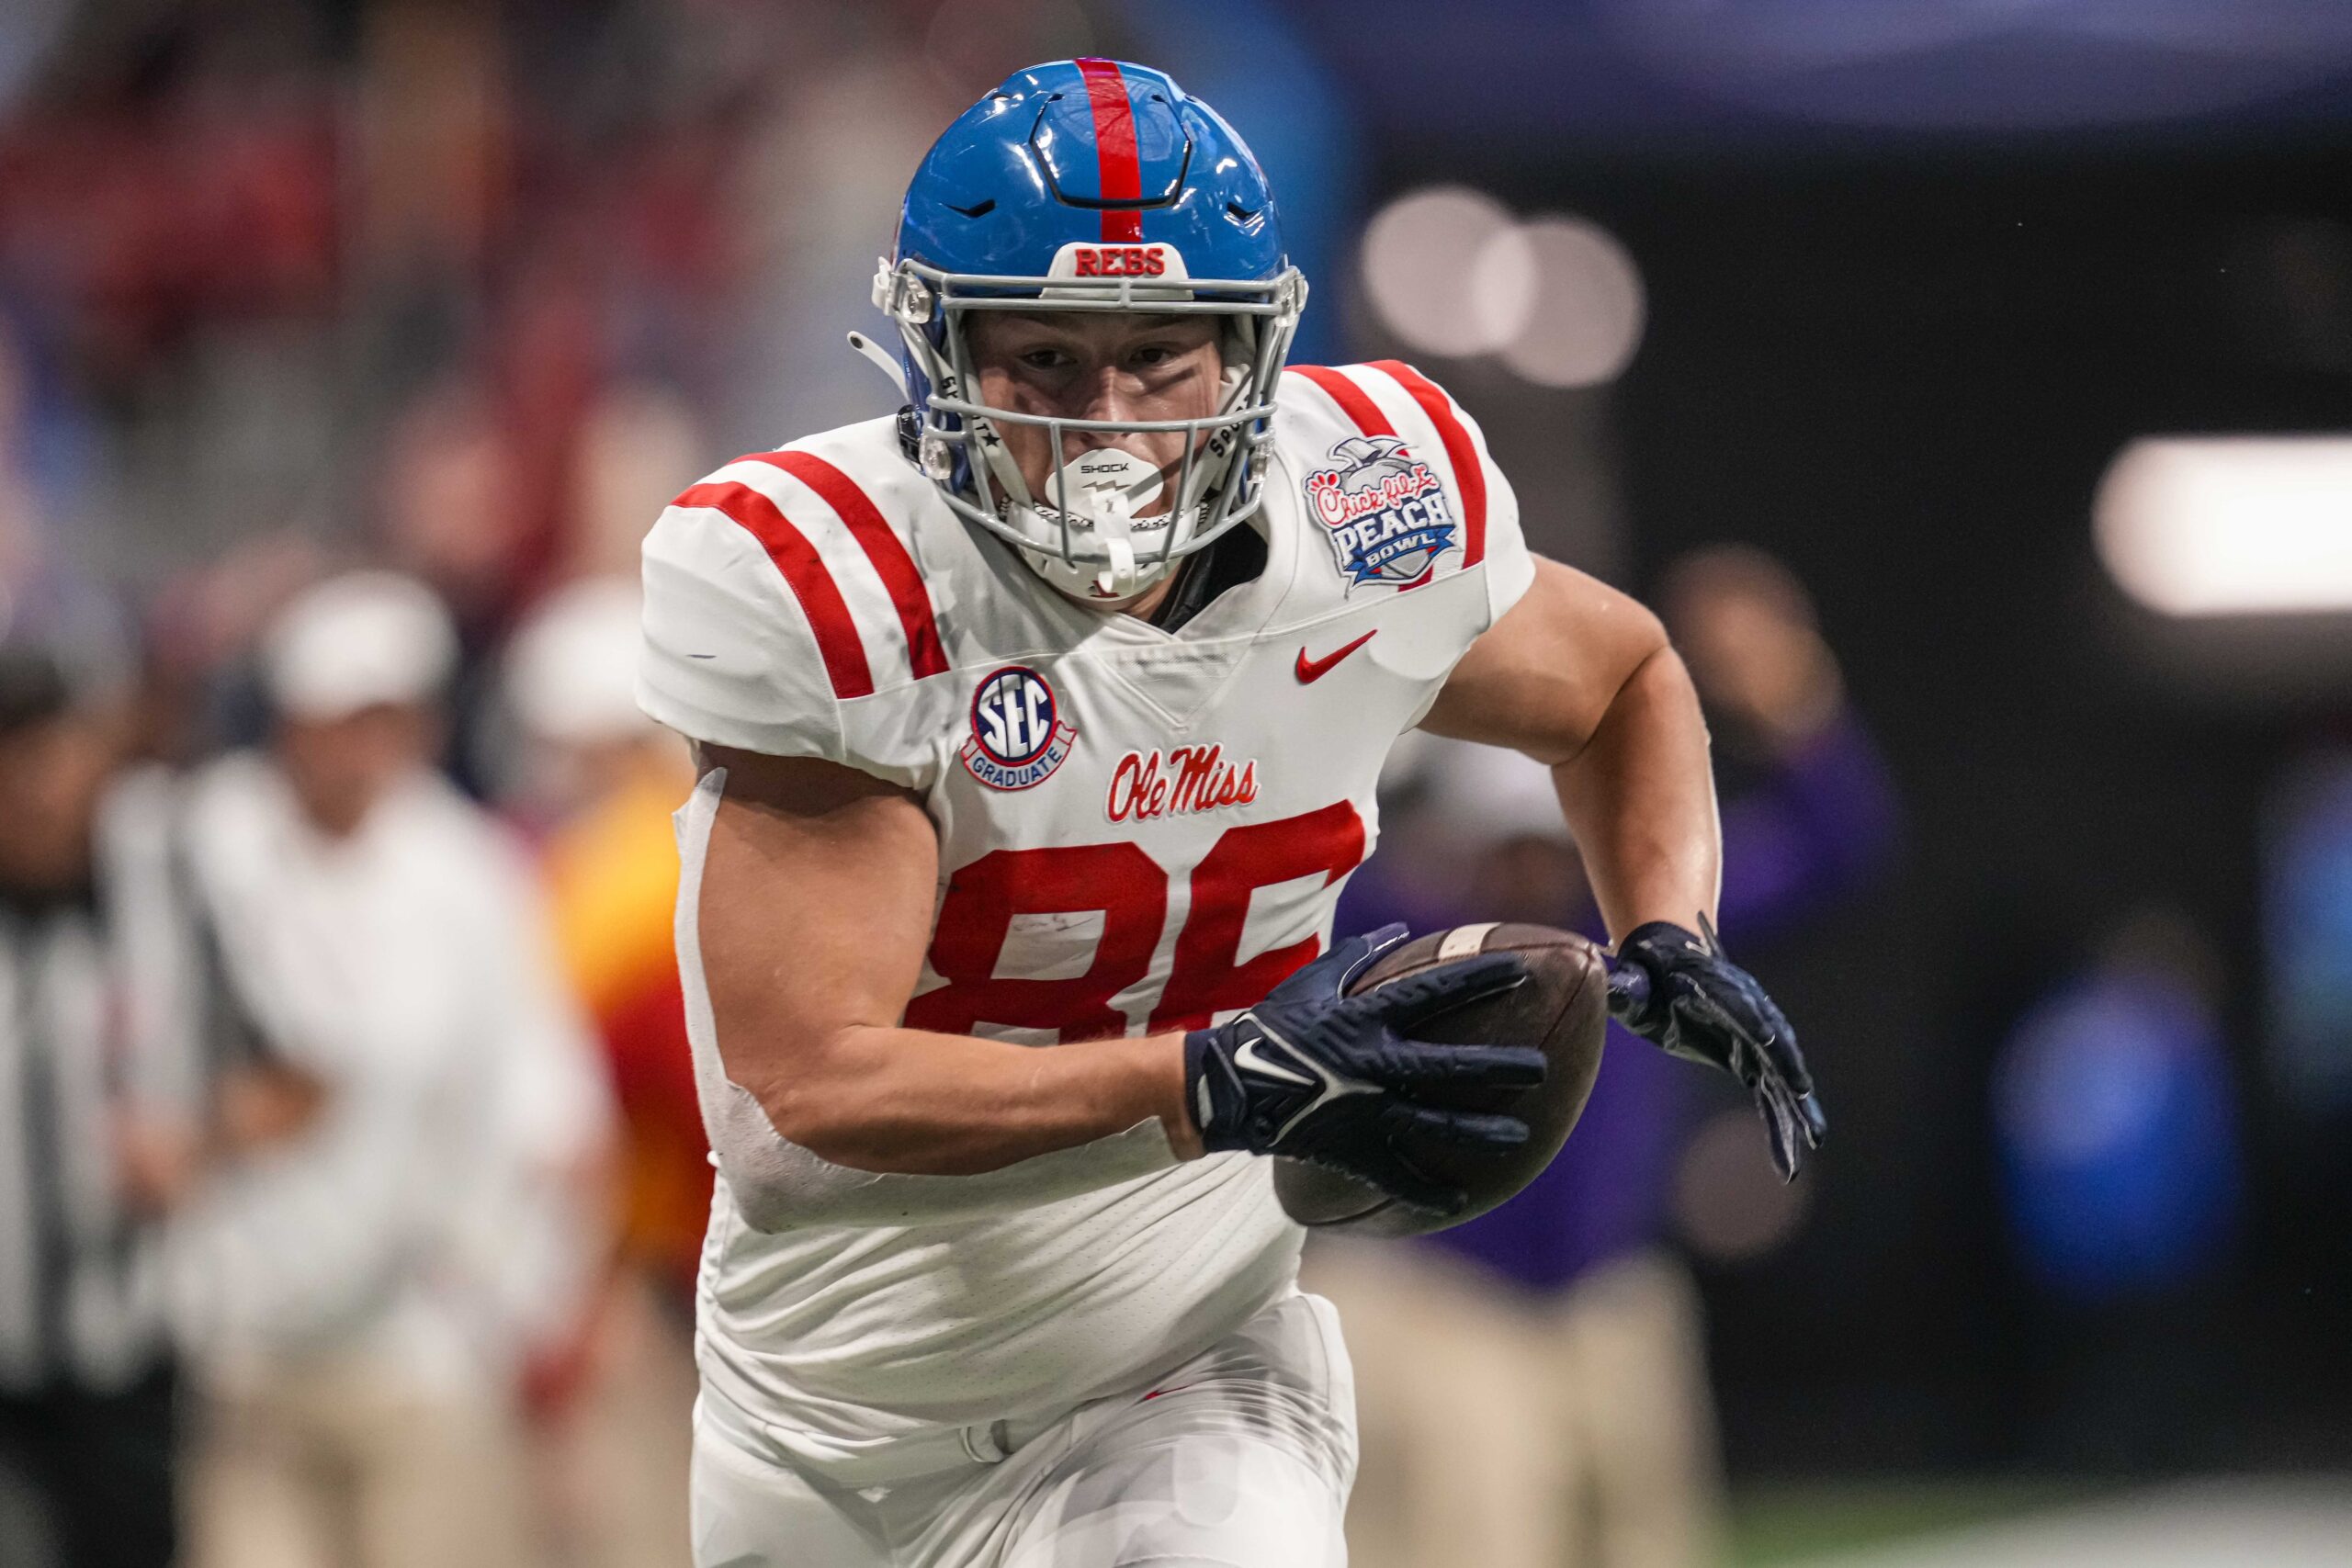 The Ole Miss Rebels win the 2023 Peach Bowl 38-25 over the Penn State Nittany Lions. The Rebels dominated all facets in the win.